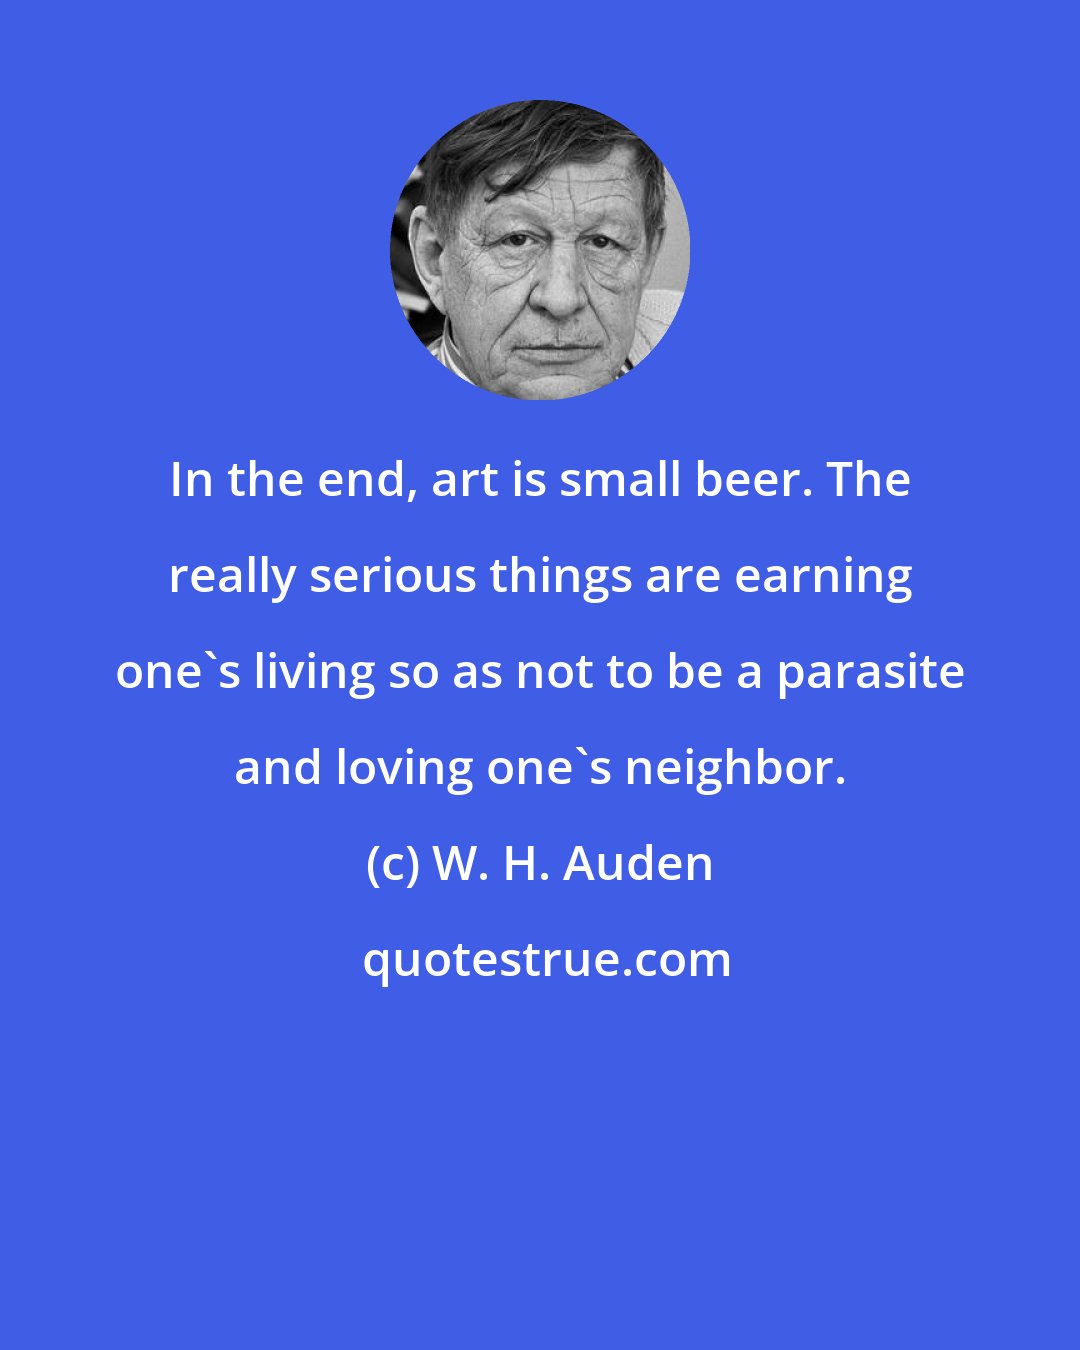 W. H. Auden: In the end, art is small beer. The really serious things are earning one's living so as not to be a parasite and loving one's neighbor.